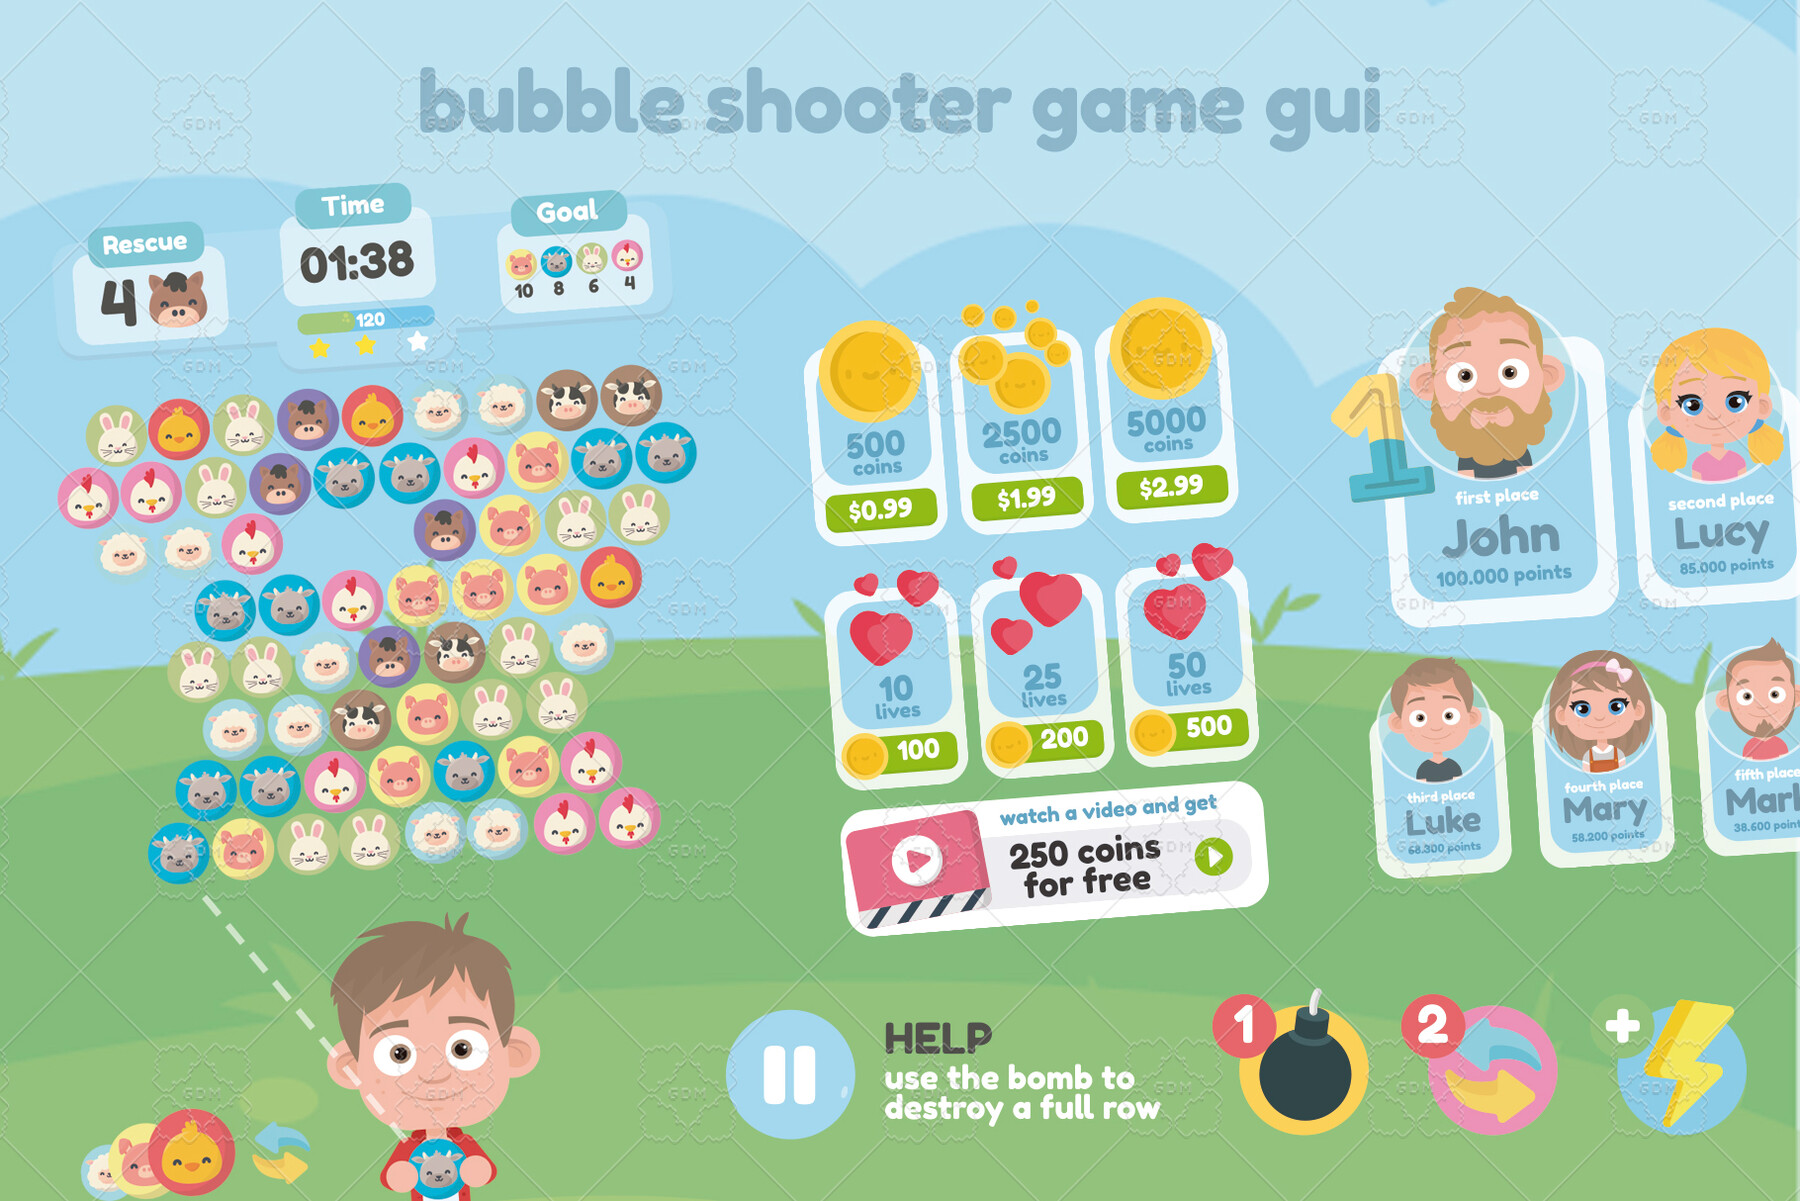 Bubble shooter game assets Royalty Free Vector Image